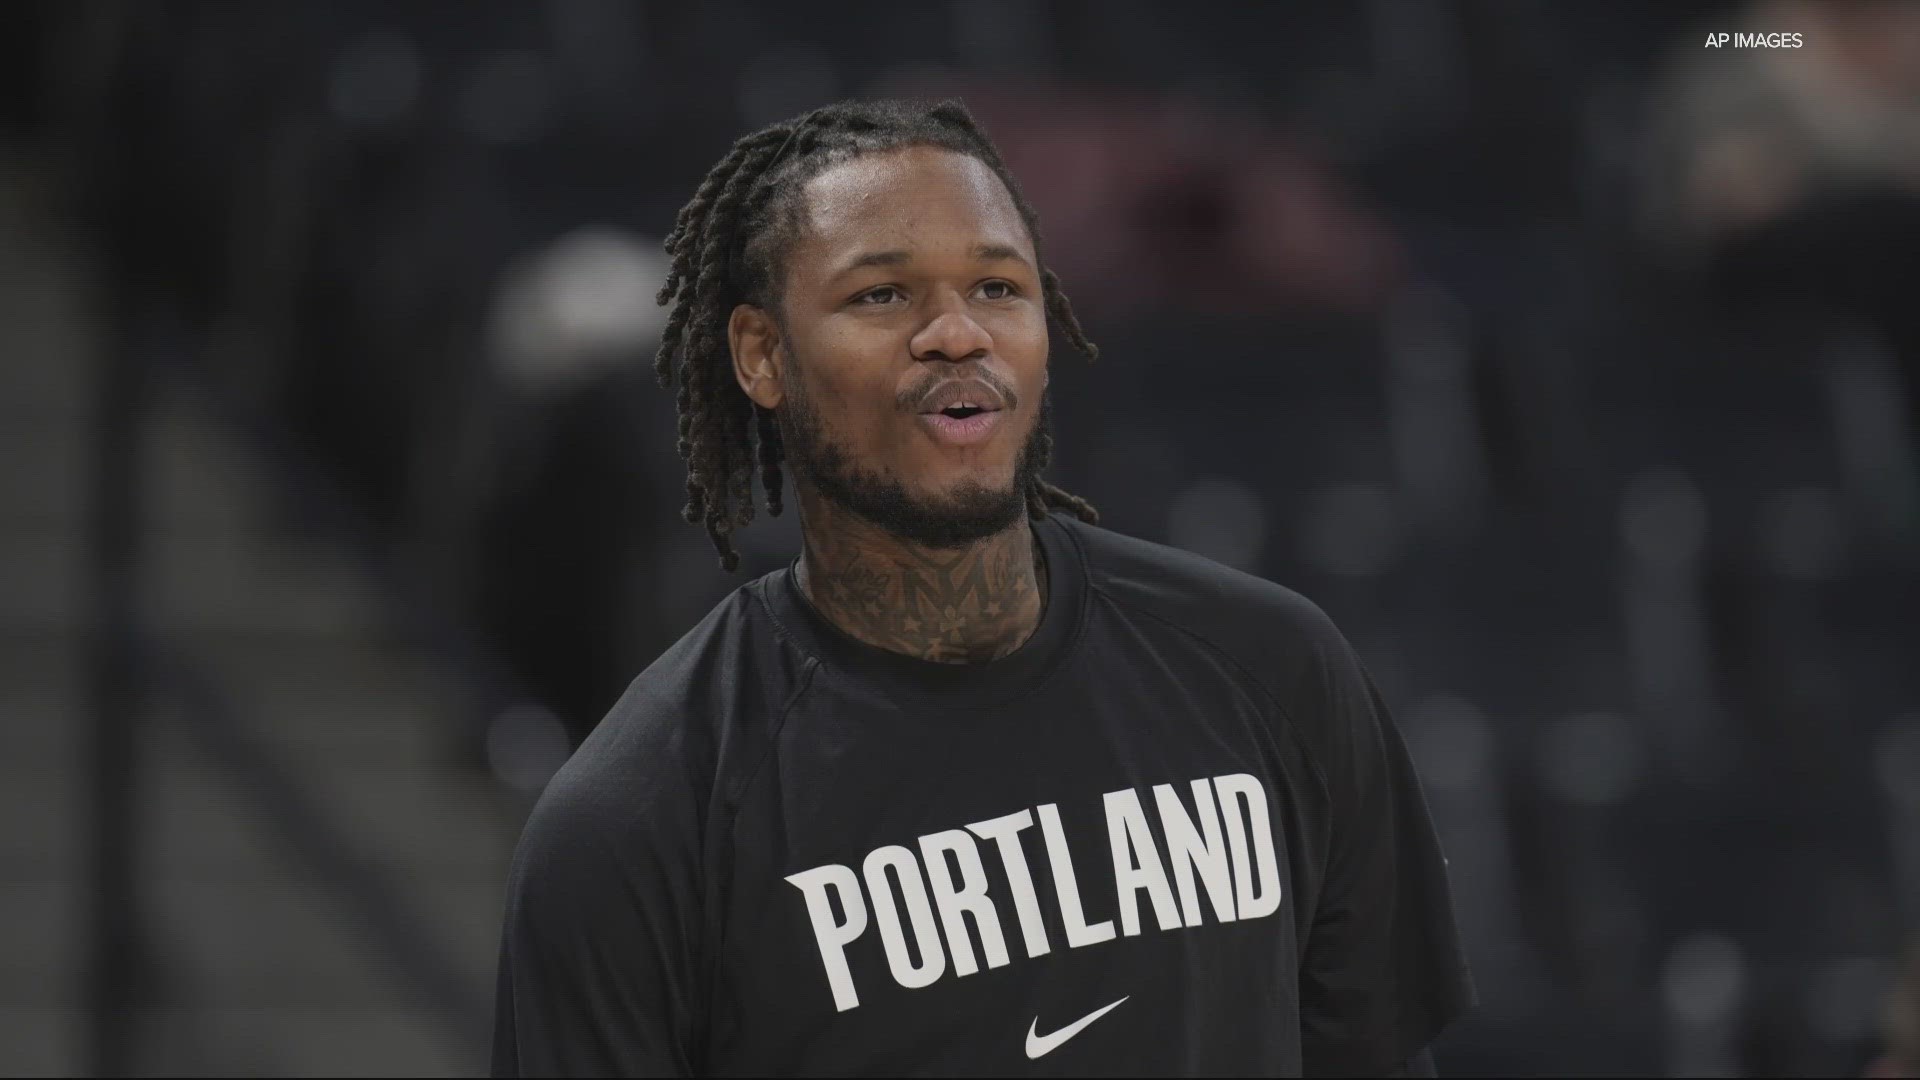 Lake Oswego police said that the sexual assault happened in early October 2021, while McLemore was with the Blazers. A grand jury chose to indict him in February.